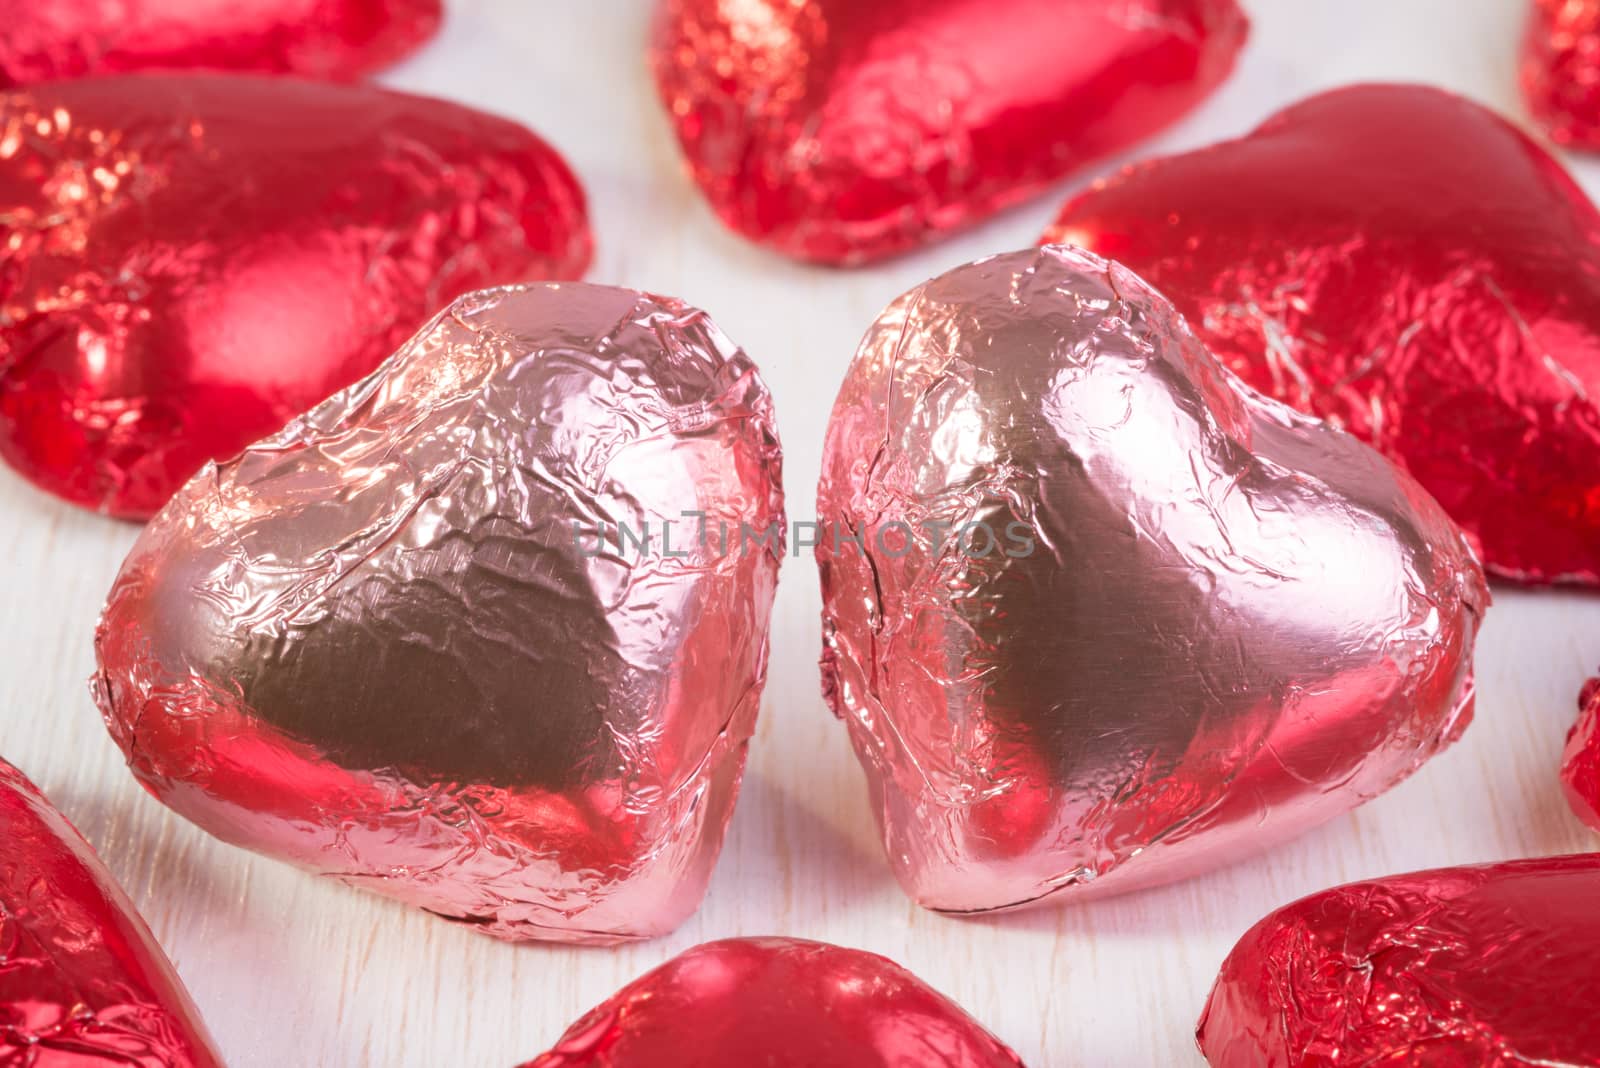 Two chocolate hearts, in pink wrapping foil, close together and surrounded by many other chocolate hearts in red wrapping foil.